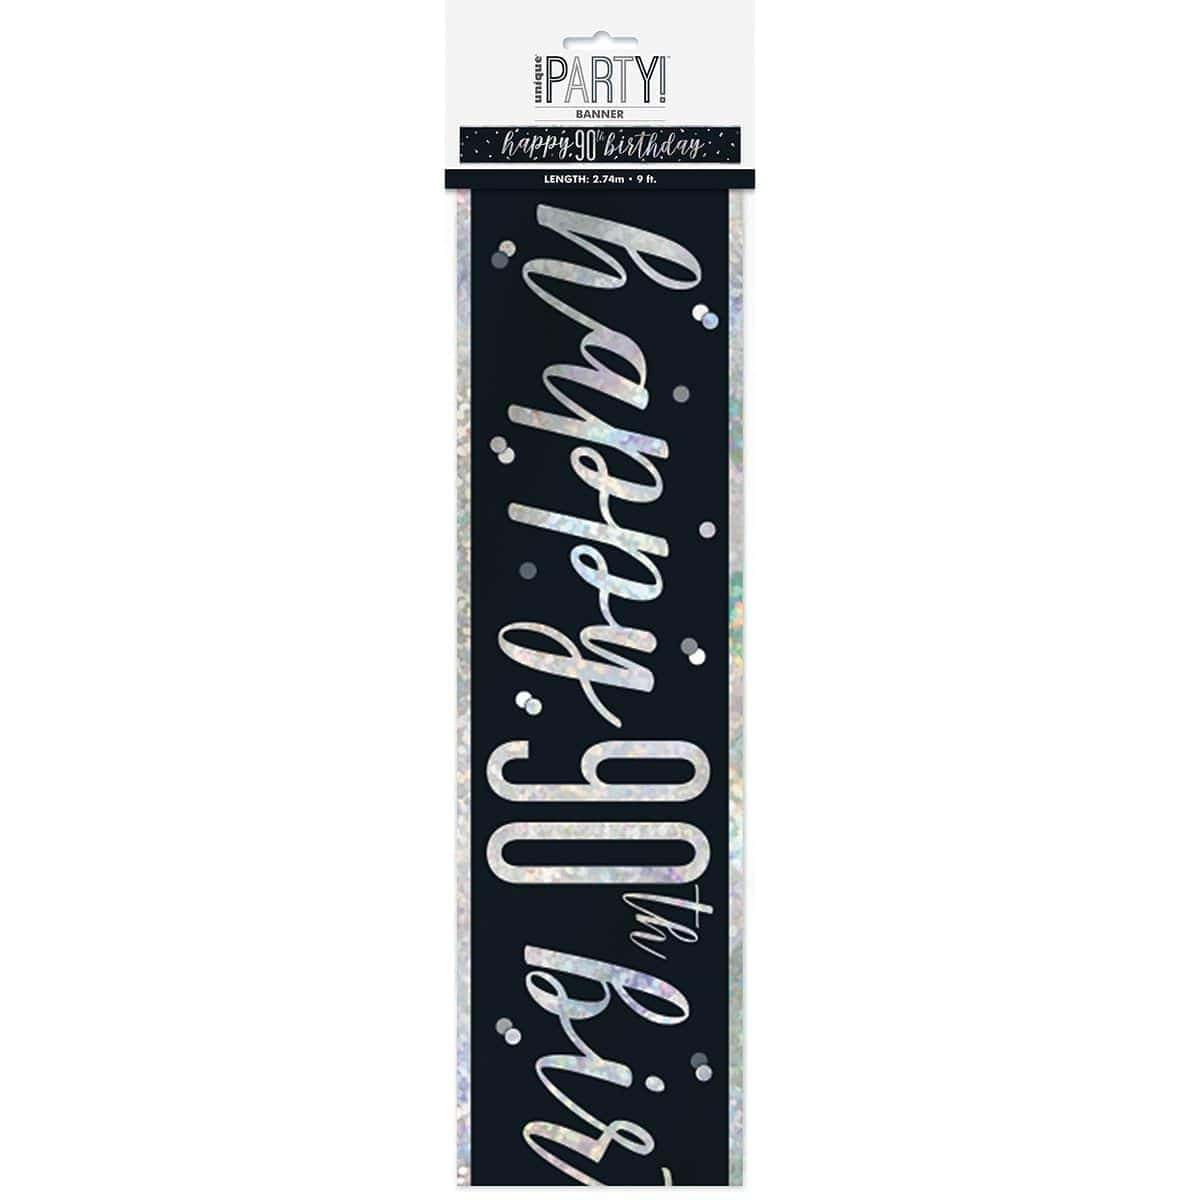 Buy Age Specific Birthday Happy Birthday Black/Silver - Foil Banner - 90th sold at Party Expert